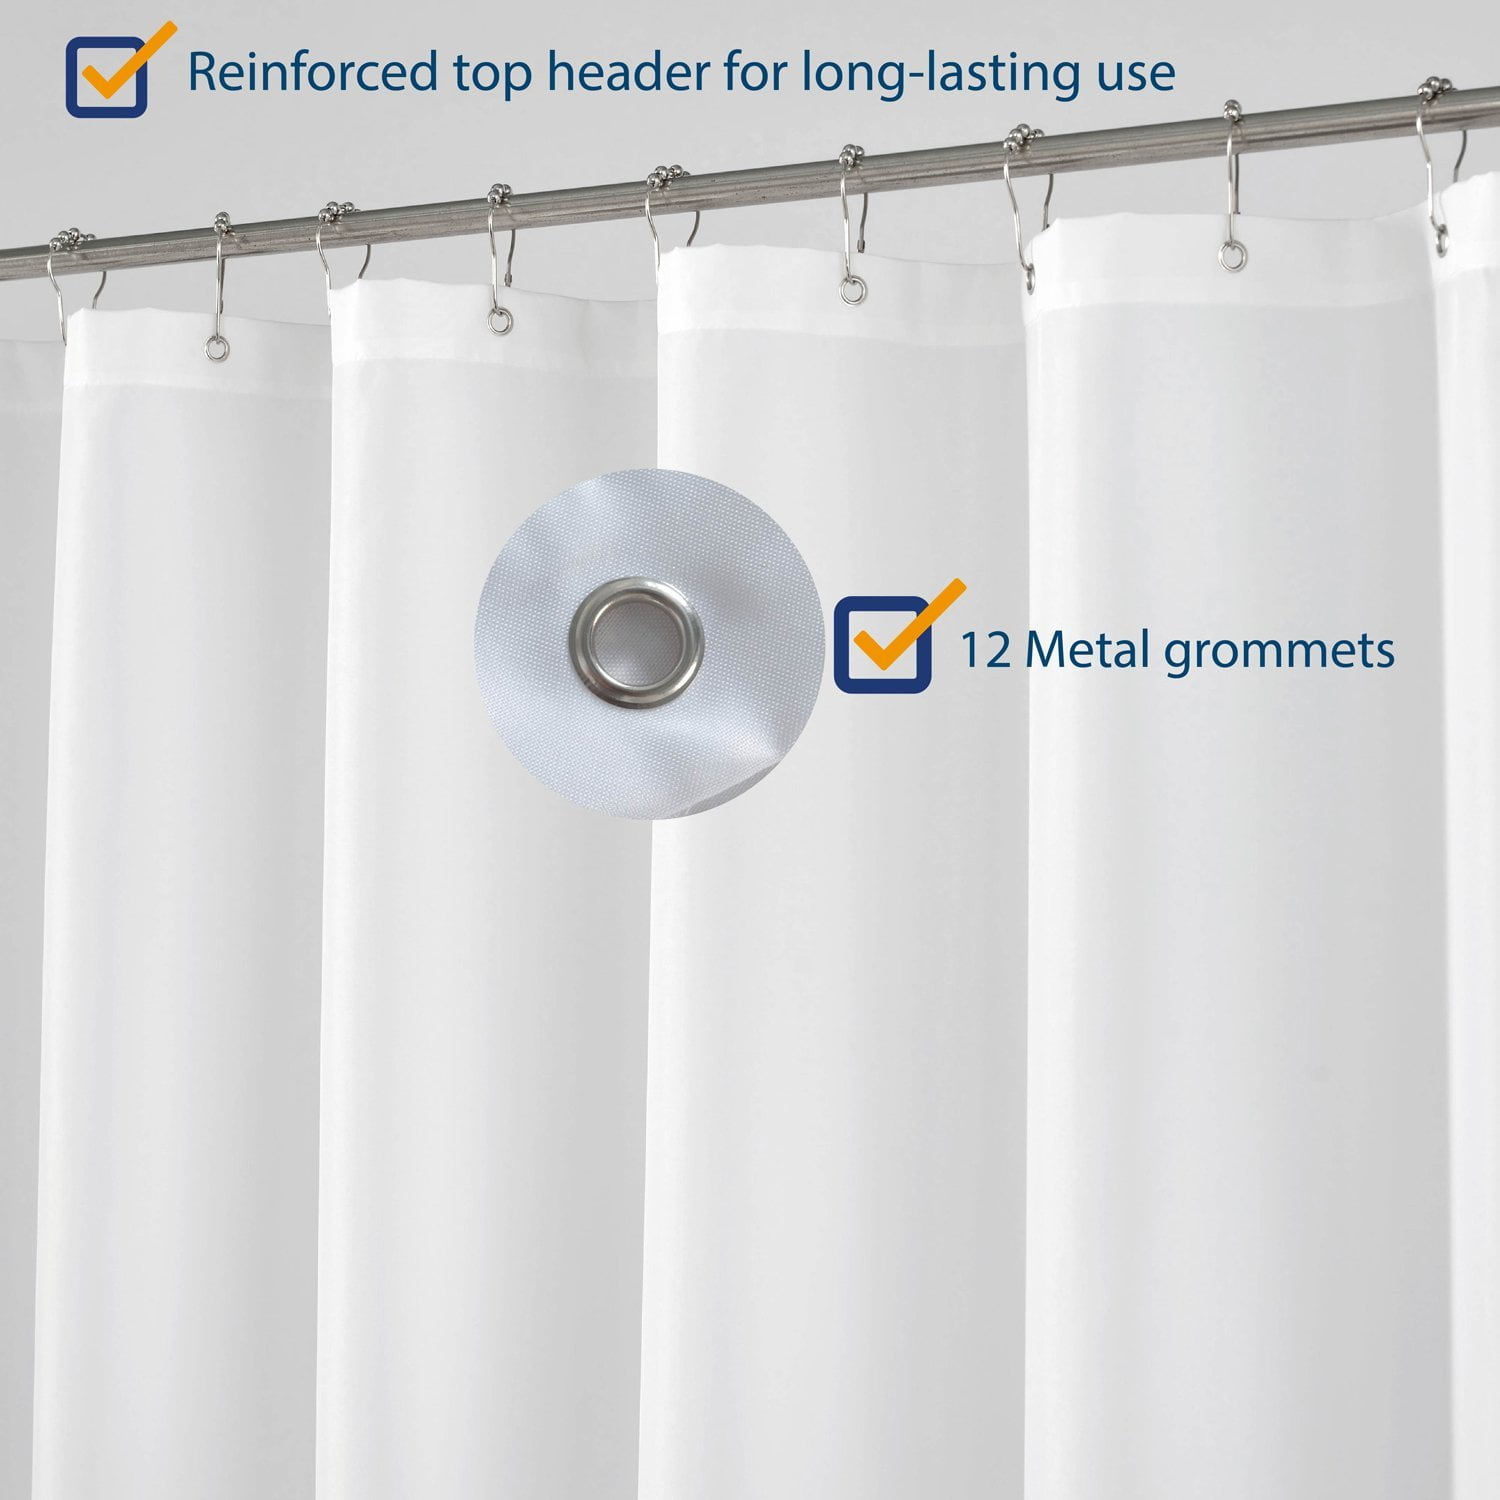 N&Y HOME Fabric Shower Curtain Liner Extra Long 72 x 84 Inches with 2 Bottom Magnets Hotel Quality Water Repellent 72x84 Washable White Spa Bathroom Curtains with Grommets